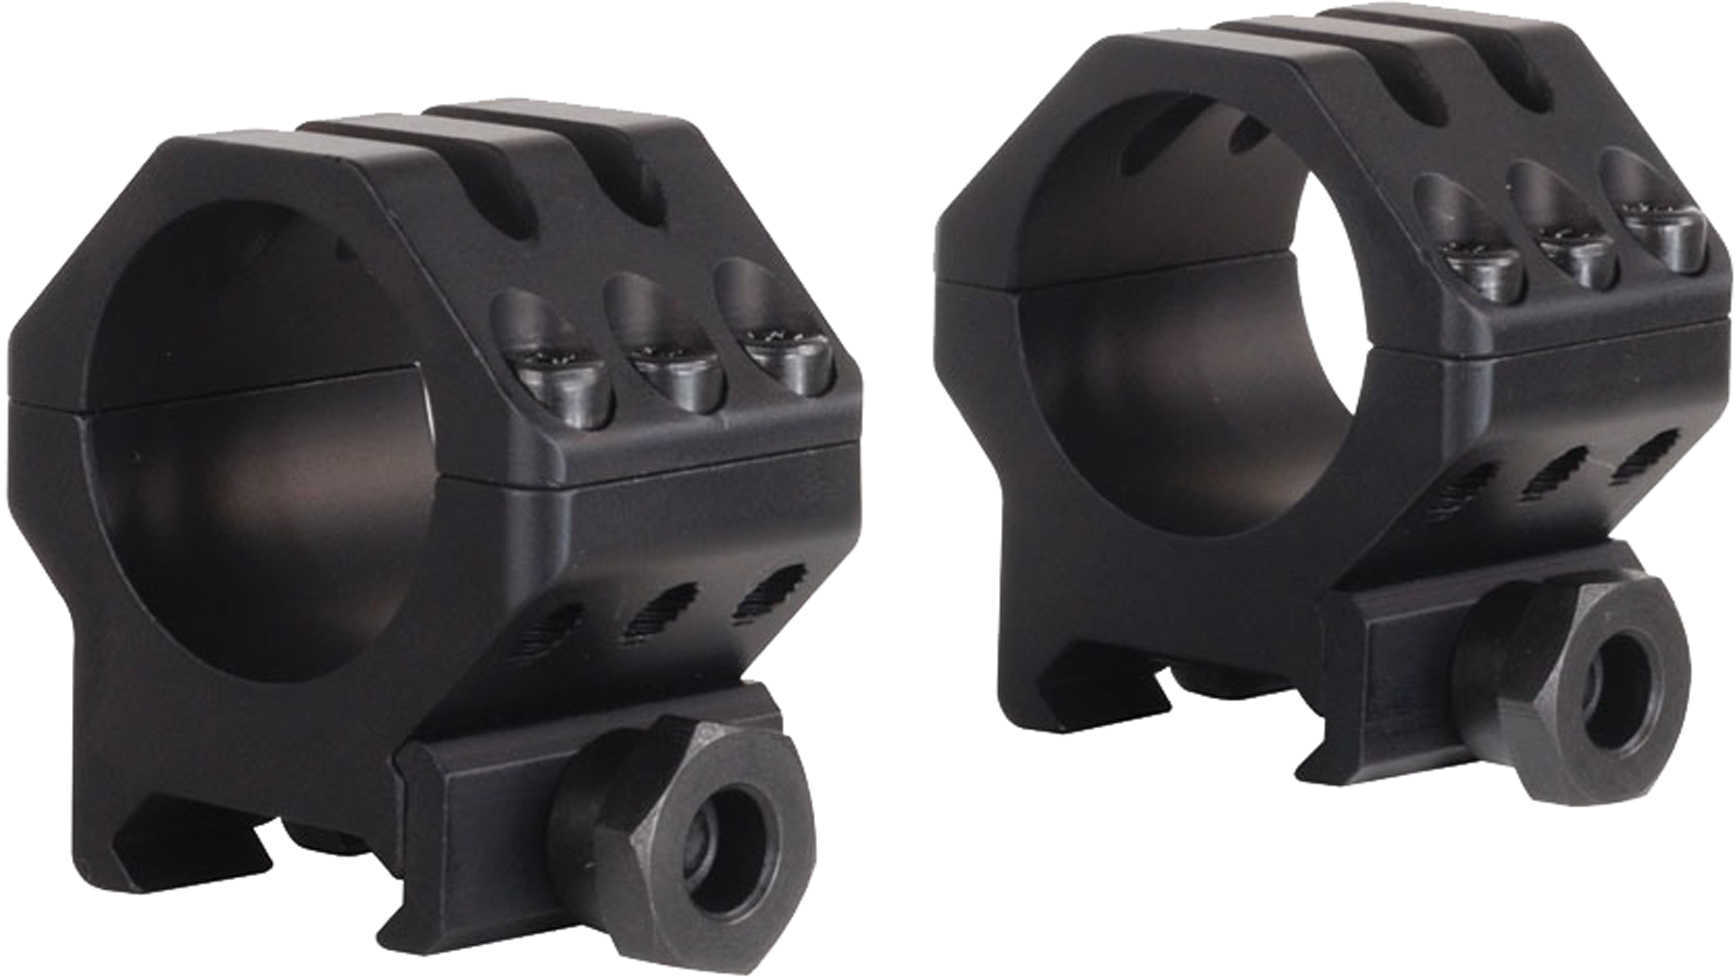 Weaver Tactical 6-Hole Picatinny Rings Medium 1" - Features the same six screws for maximum security and cl 99688